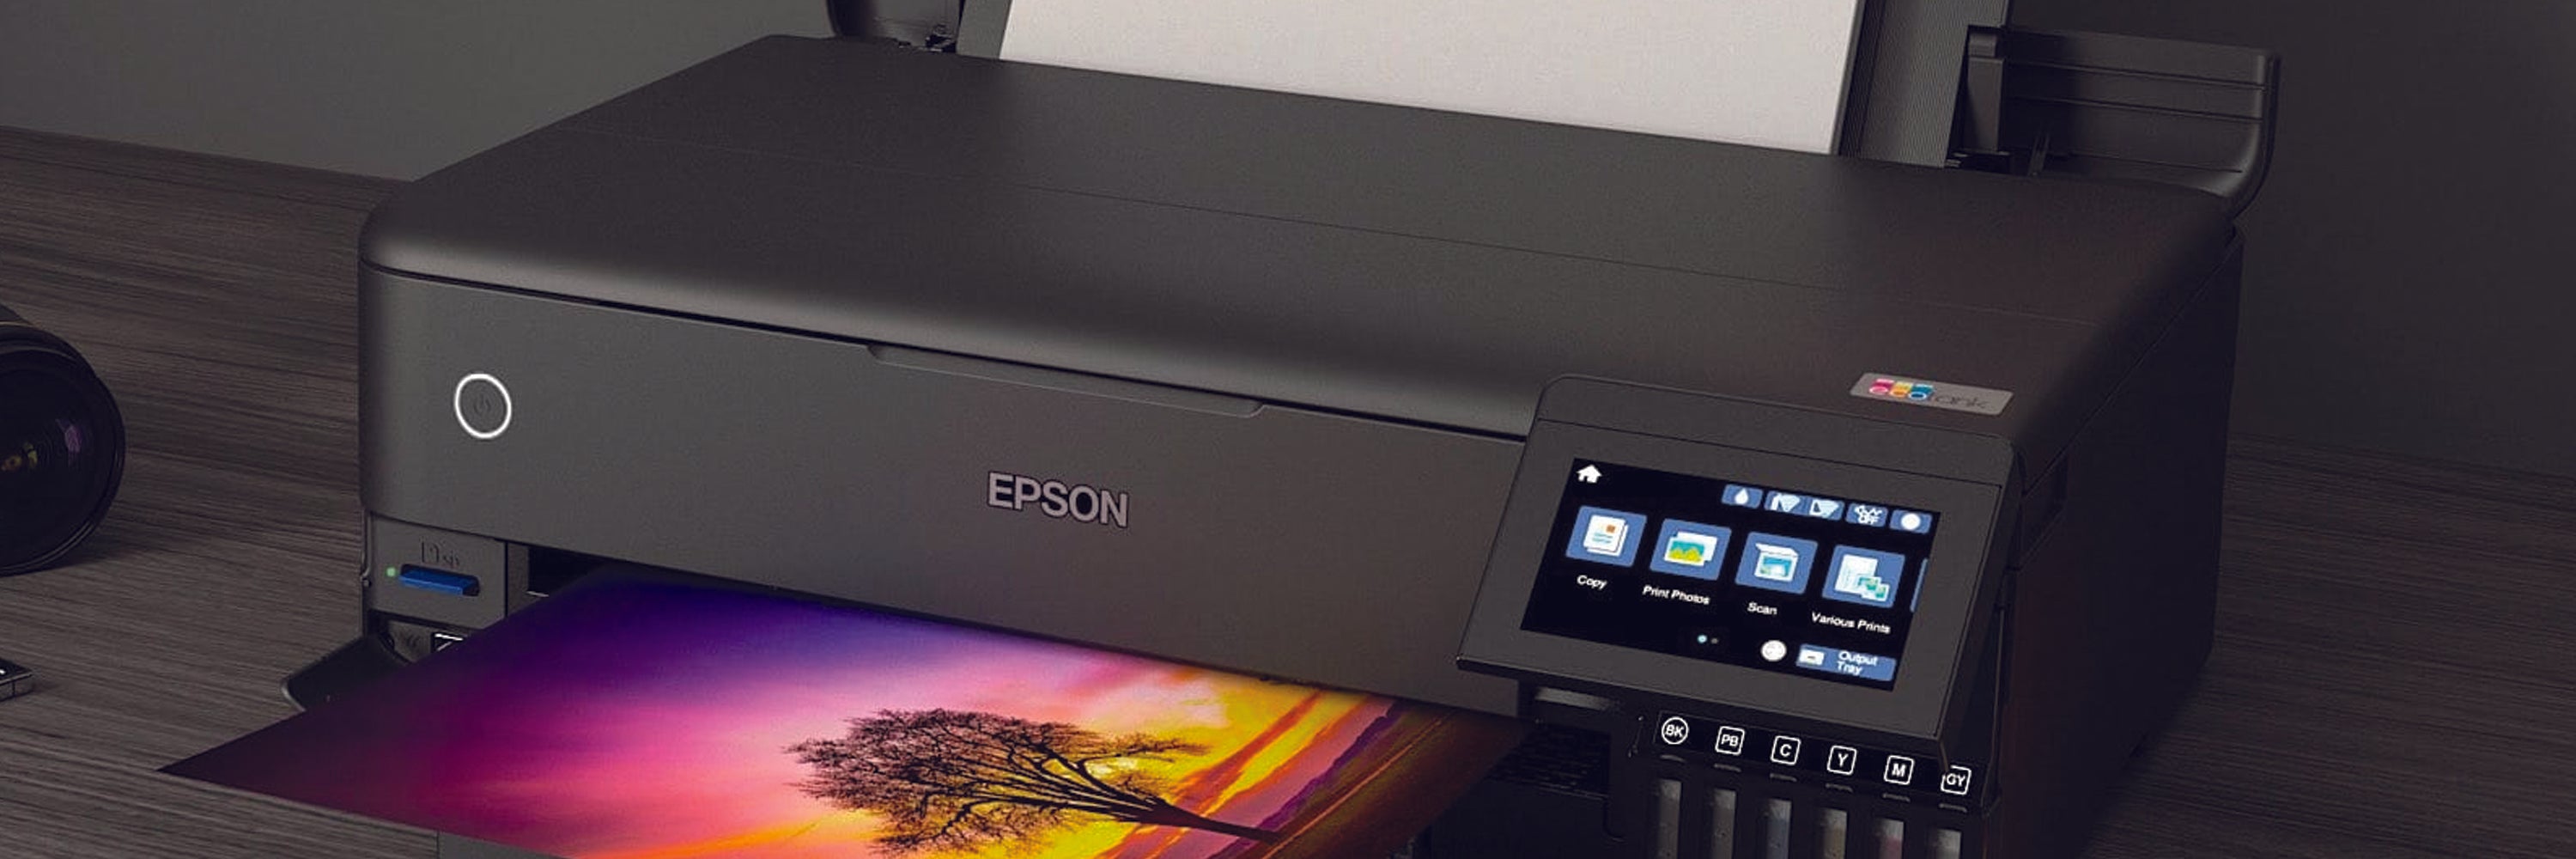 Epson Expression Premium XP-610 All-In-One Inkjet Printer for sale online